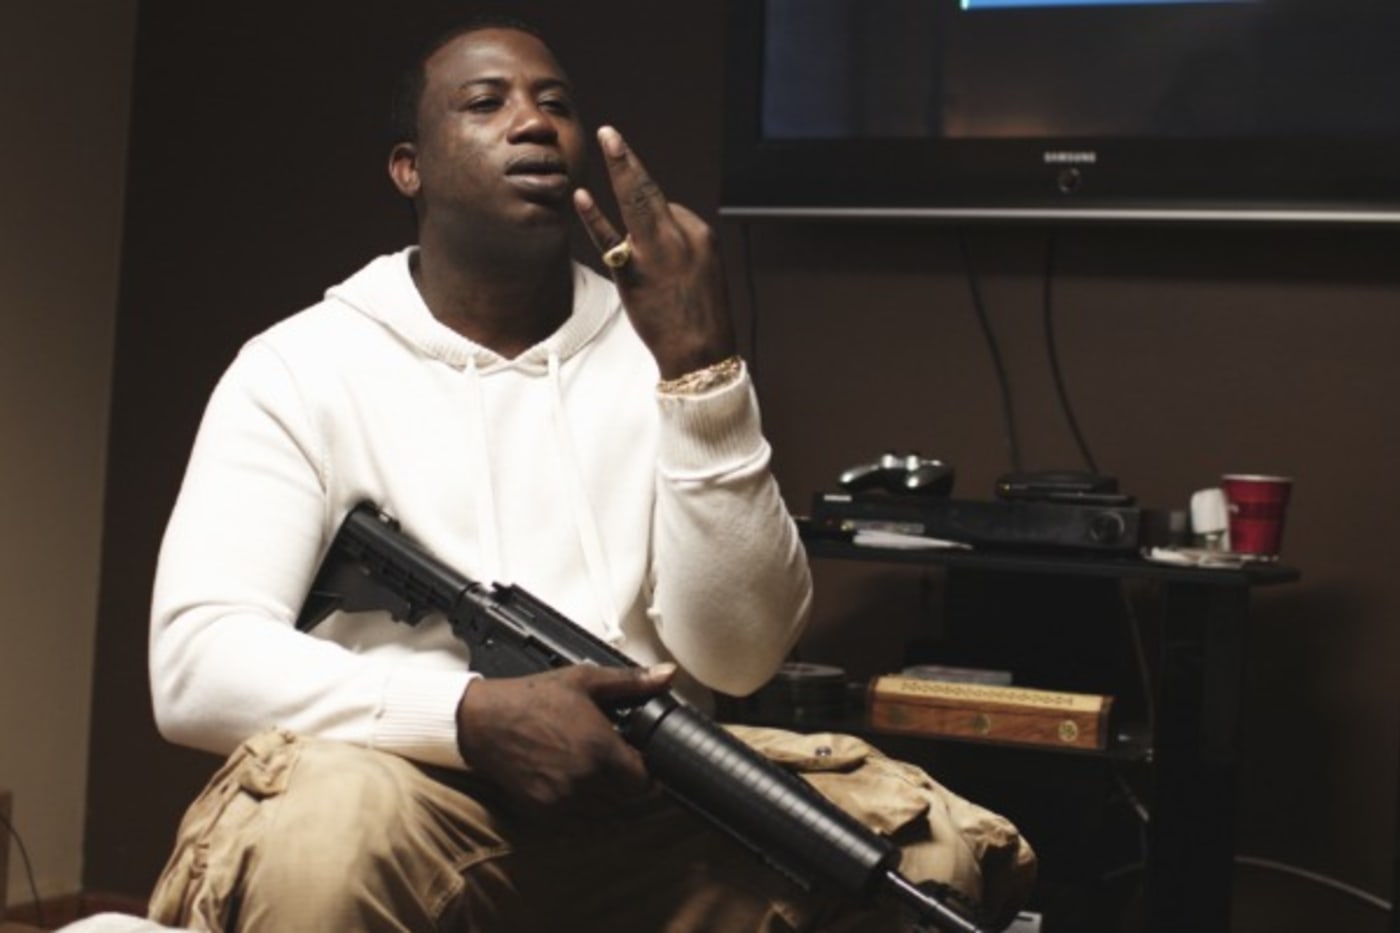 A Gucci Mane Photo Exhibit Held in a Trap House Will Open This Week |  Complex